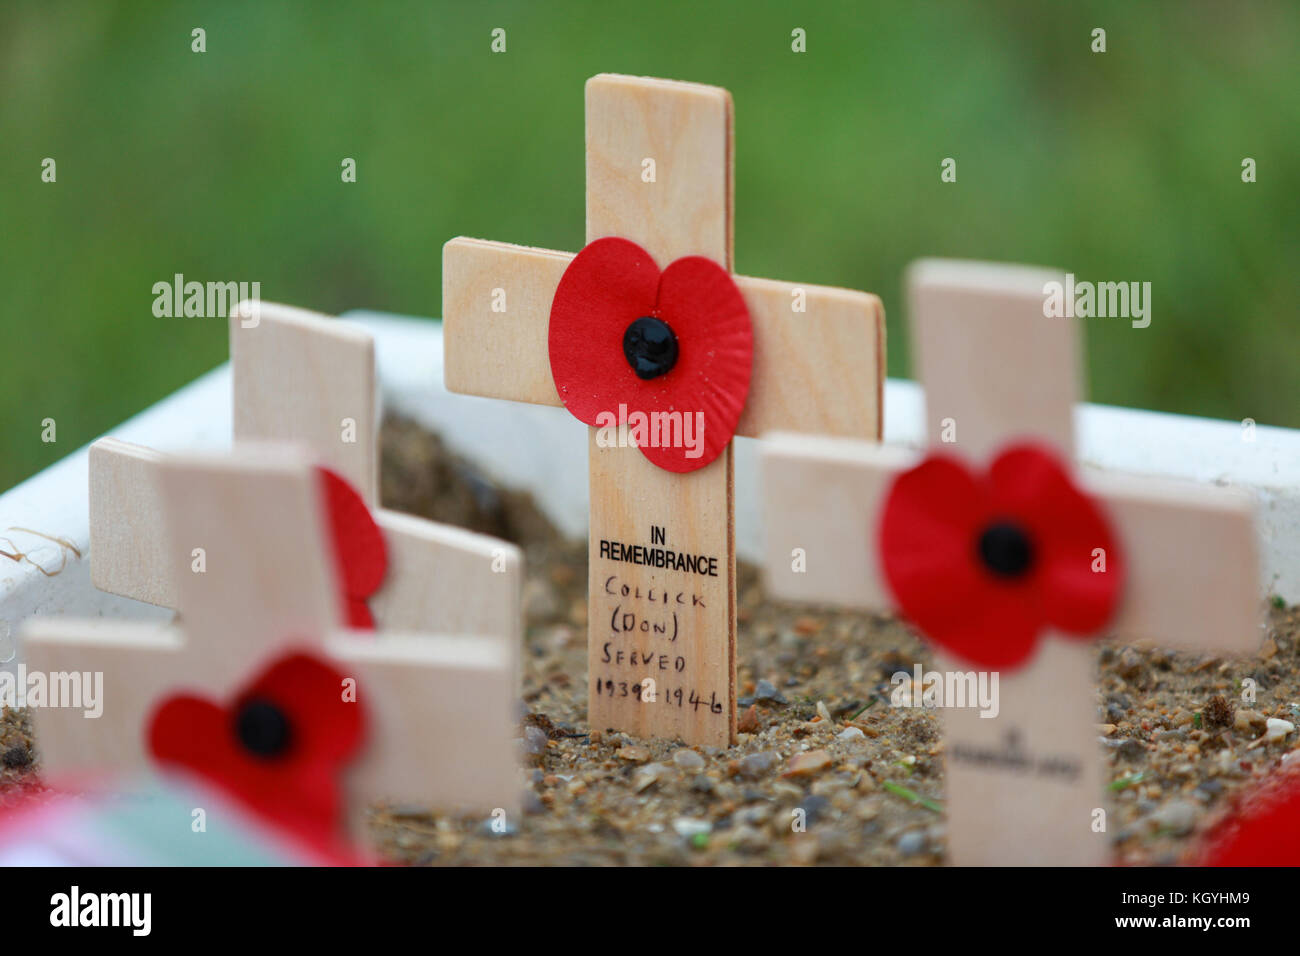 Ashford, Kent, UK. 11th November, 2017. Members of the local bowling club and the Royal British Legion in the village of Hamstreet in Kent remember those who fell in WWII. Photo Credit: Paul Lawrenson /Alamy Live News Stock Photo